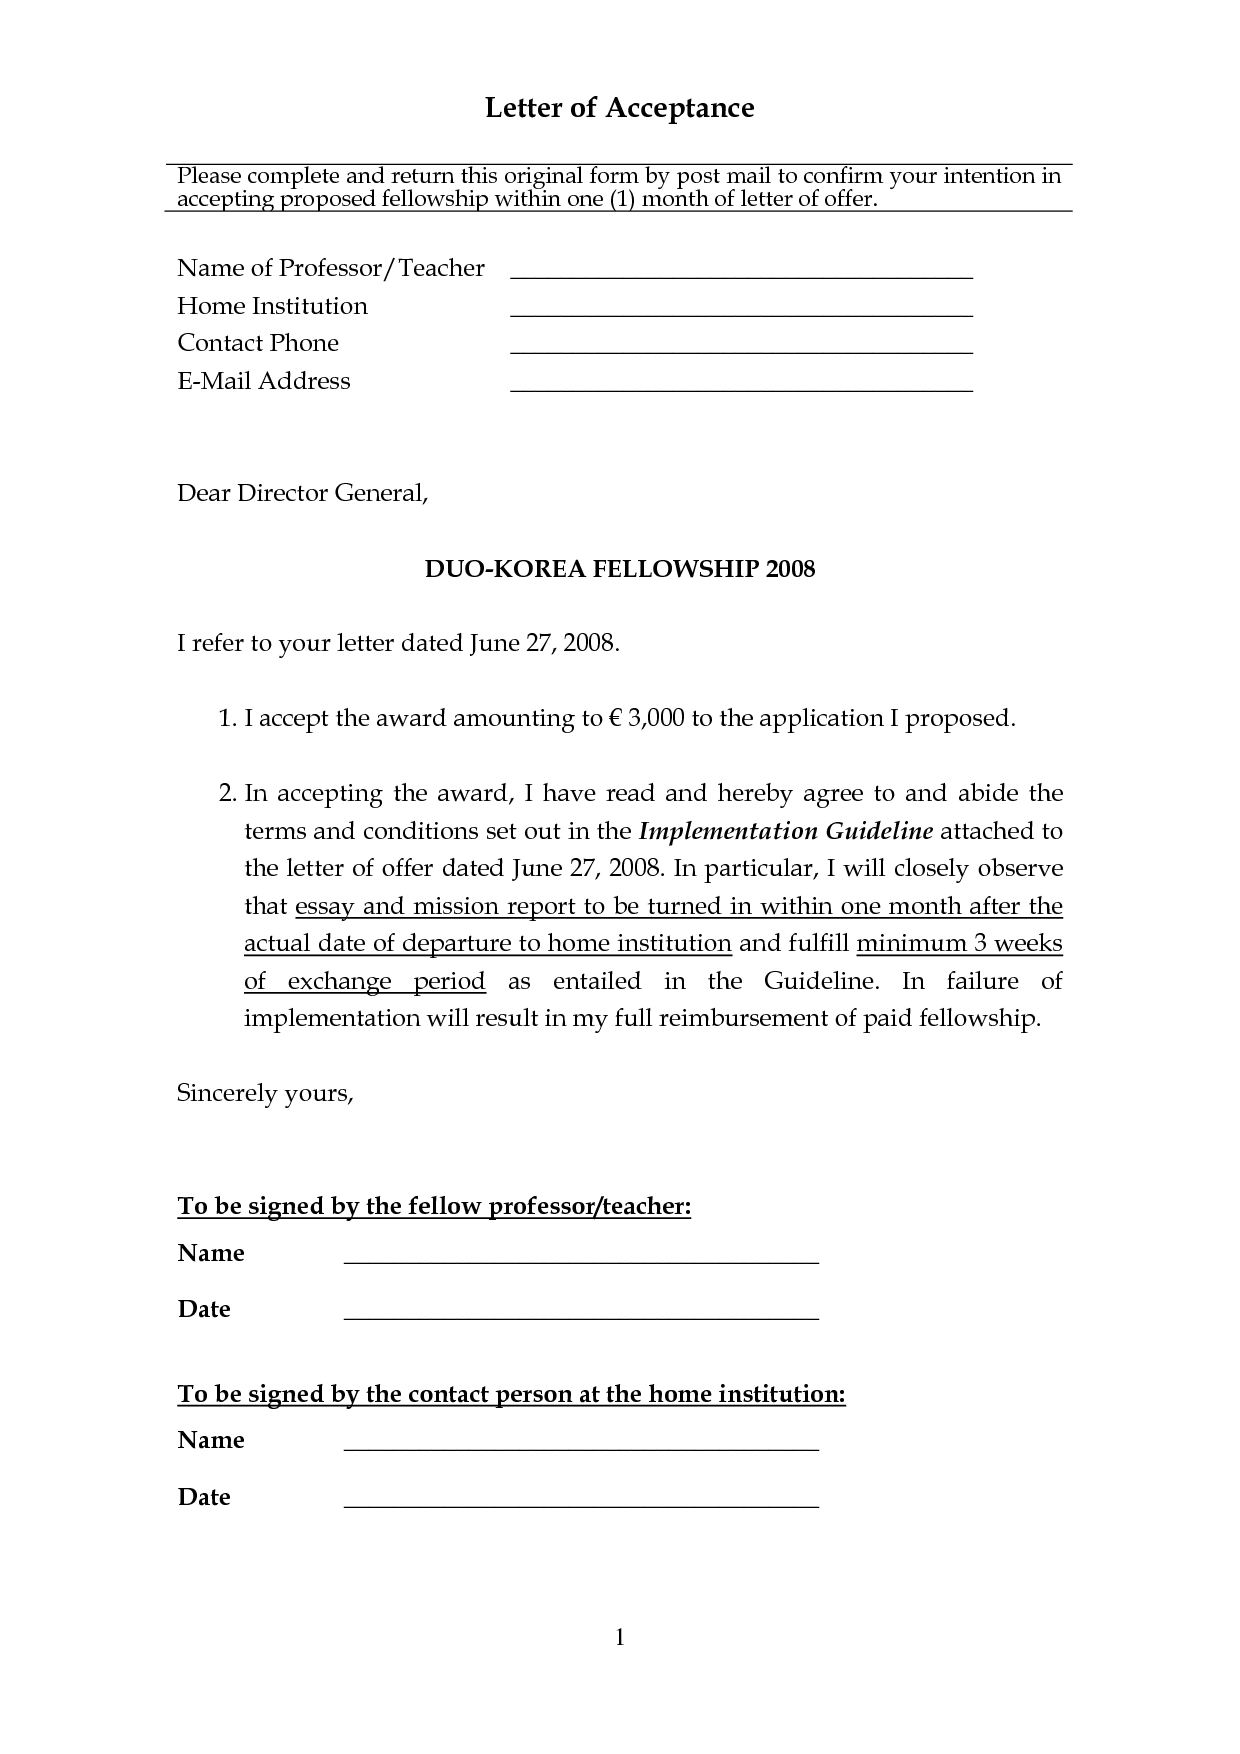 Sample Letter Of Disagreement Template - Fellowship Acceptance Letter Guide for Writing Fellowship